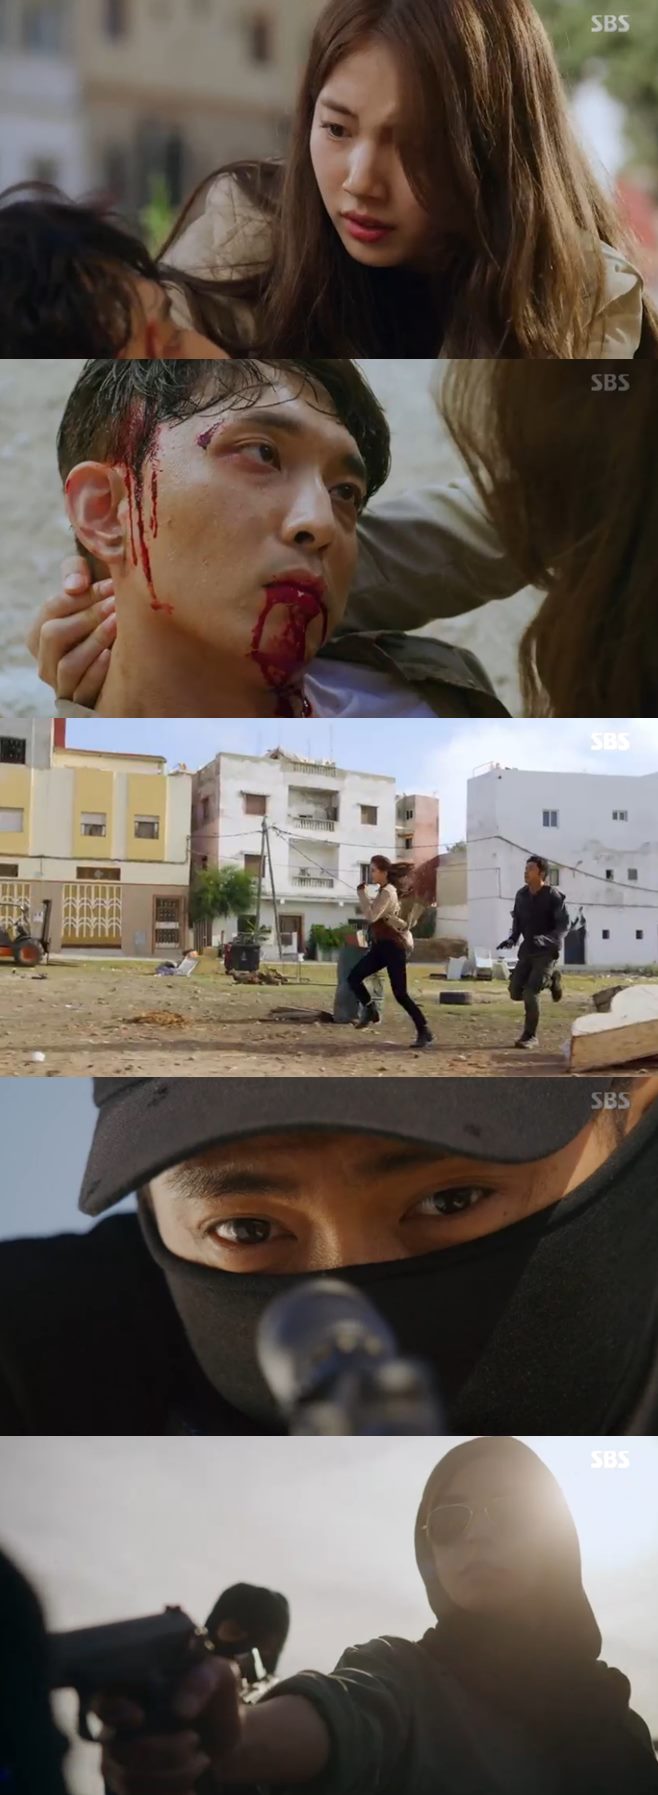 With the Vagabond Yun bamboo dying with a question left, Lee Seung-gi and Bae Suzy, who confirmed that the Planes accident was a terrorist accident, began to move together.In the third and fourth episodes of SBSs Drama Vagabond (playwright Jang Young-cheol and director Yoo In-sik), which aired on the 27th night, Cha Dal-geon (Lee Seung-gi), Gohari (Bae Suzy), Kitaewoong (Shin Seong-rok), Jessica Lee (Moon Jeong-hee), Jung Kook-pyo (Baek Yoon-sik), Hong Soon-jo (Moon Sung-geun), Edward Park (Lee Kyung-young), Kang Ju-cheol (Lee Kyung-young) The thriller social drama surrounding Lee Gi-young, Yoon Han-ki (Kim Min-jong), Min Jae-sik (Jung Man-sik), Gong Hwa-sook (Hwang Bo-ra), Yun bamboo, and Lily (Ah-in Park) was drawn.Harry, who combined the evidence, confirmed that the Planes accident was a terrorist accident with Terrorists. Harry informed Dalgan of this fact.Dalgan had already been moving with Kim Ho-sik and was chasing the back of the country. Harry, who had been investigating the situation in many ways, tipped Dalgan that Kim Ho-sik seemed to be related to the criminal.Eventually, they faced the truth and questioned the truth, but the old ones who had already been abandoned by the people behind them were dying.Hosik left a will that he could not help but save his family, and eventually died after being shot by other Terrorists.Together, Dalgan and Harry fought a fierce survival, avoiding the gunmens guns.Dalgan, a stuntman, overpowered the criminal within three seconds under the direction of Black Agent Harry, and the two men raced to the street without guns, amplifying tension.The NIS inspector general, Kiwoong, was a key member of the NIS, and he was aware of his bosses.He was an elite and ardent, and he told his boss, who was crazy about promotion, Is that a problem now?The boss told taewoong, But this does not seem to have been deliberately destroyed.The video that I took to censor security was also viral. He also said that he suspected him.Who is behind the attacks in the Planes accident, and no one can relax.